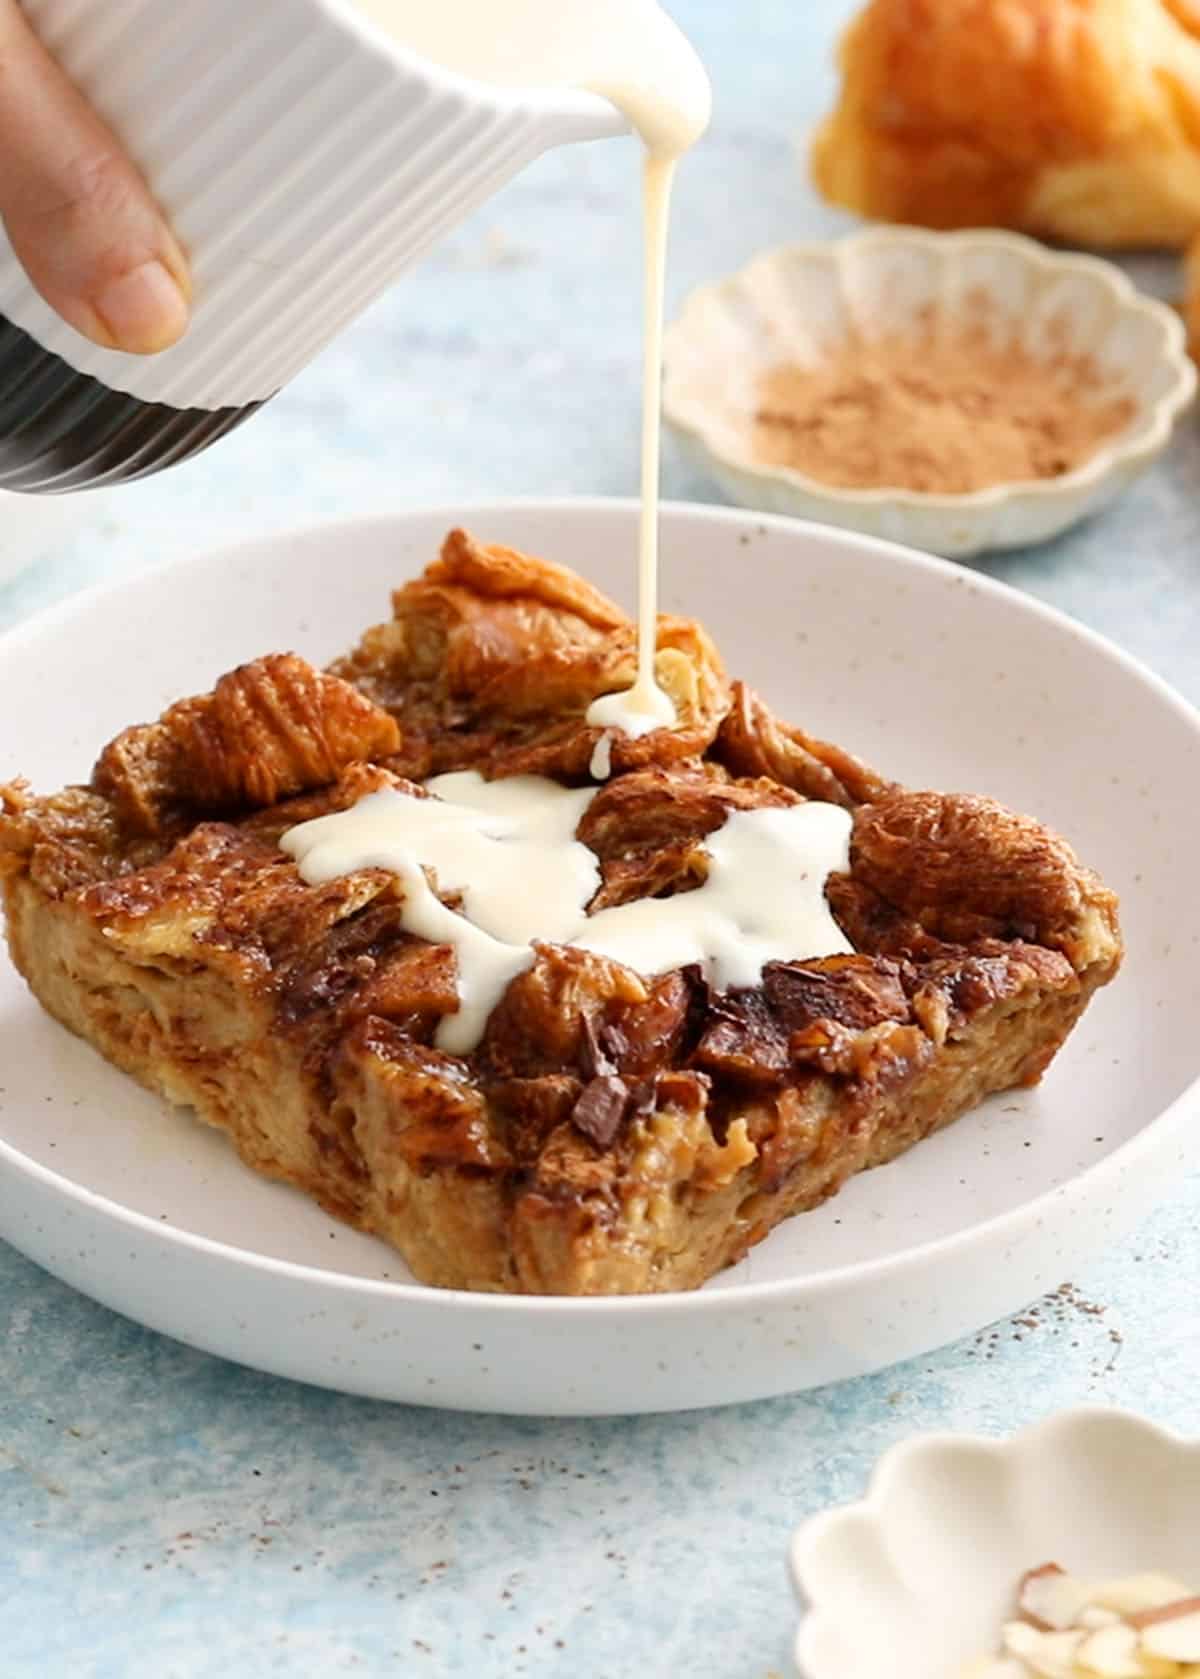 a hand pouring white sauce over a square piece of croissant bread pudding placed on a white plate.